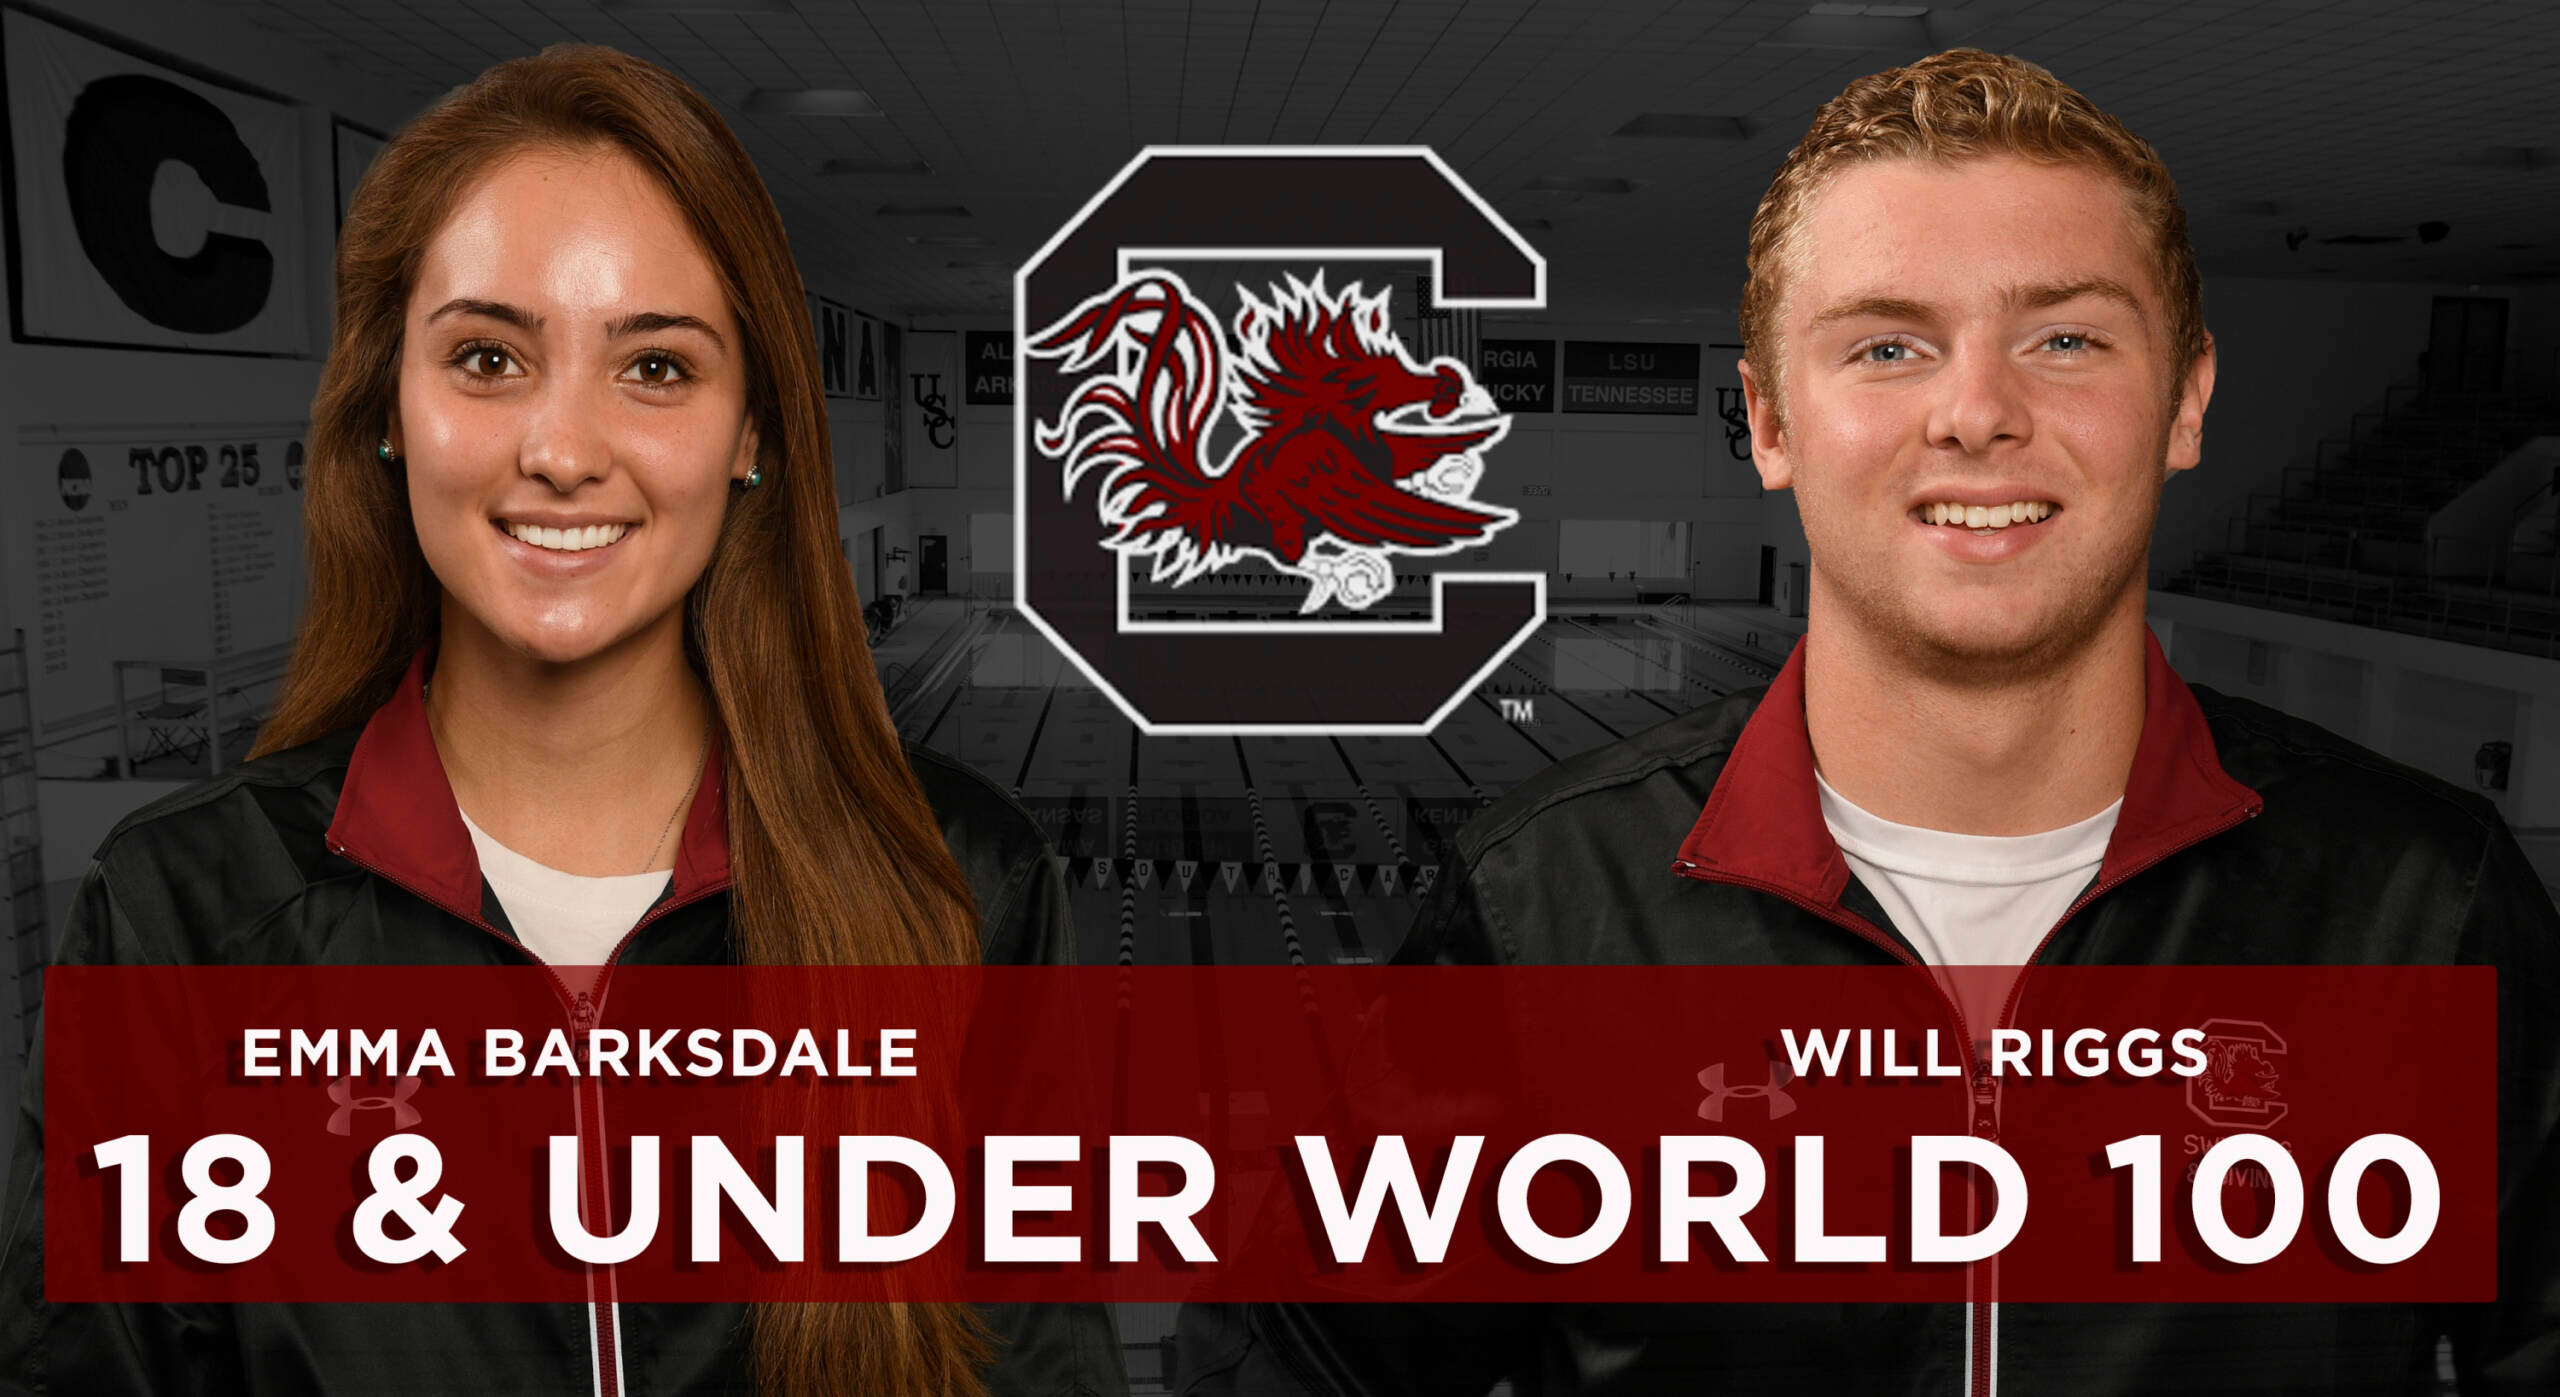 Barksdale, Riggs Named to 18 & Under World 100 List